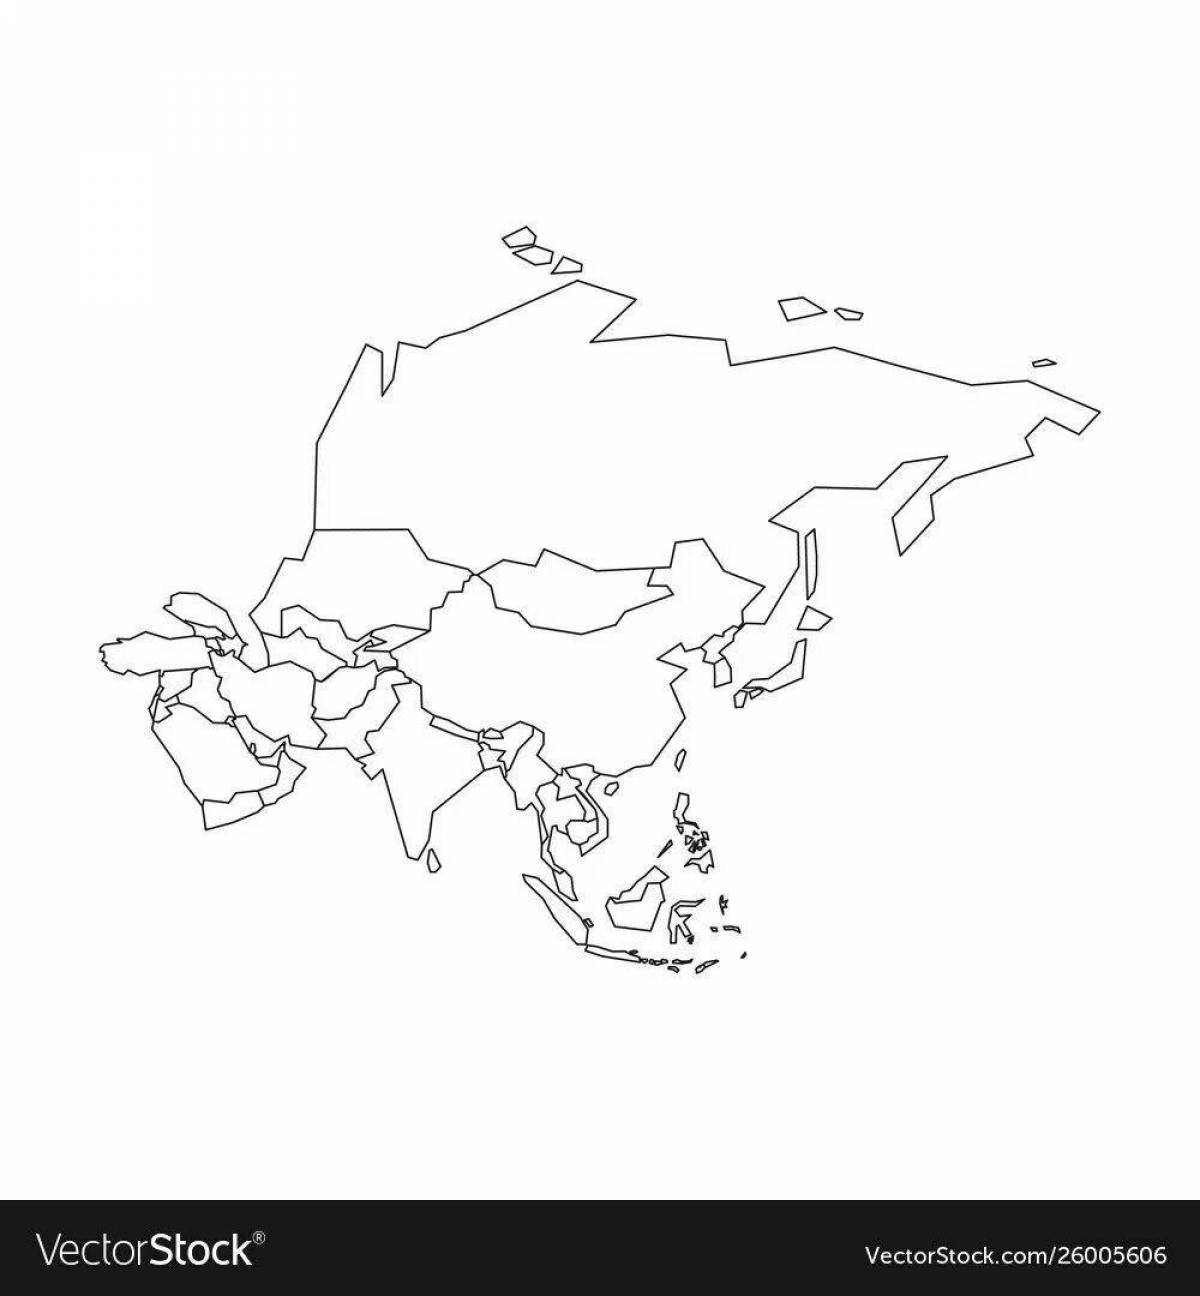 Coloring book wonderful map of asia